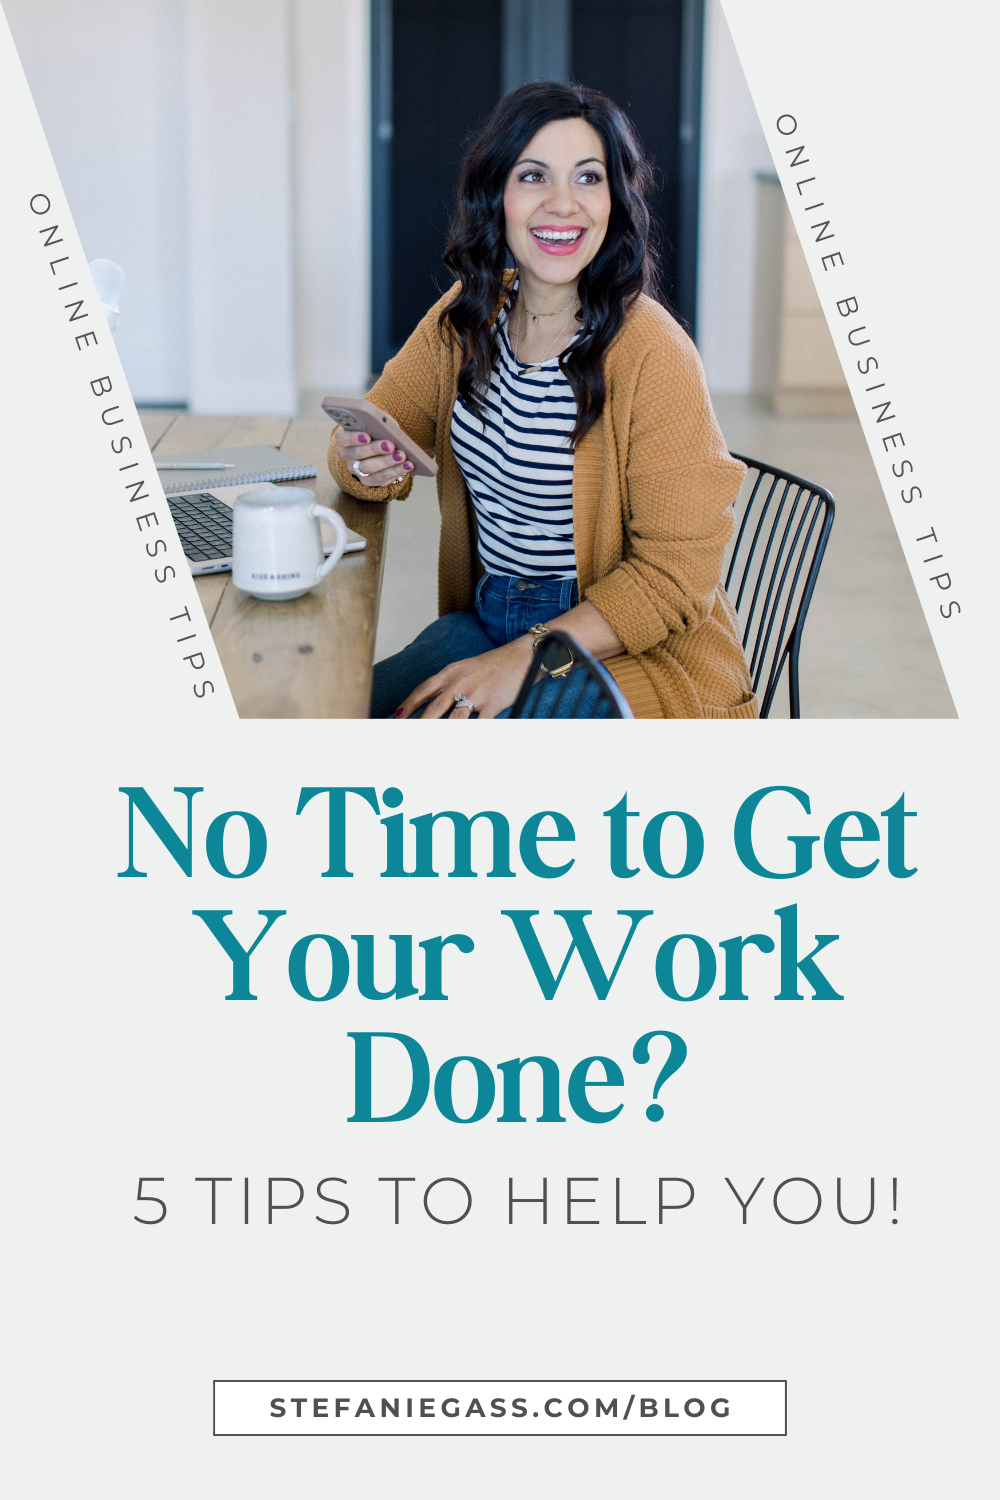 smiling brown haired woman sitting at her table with her phone in her hand and laptop and coffee on the table  Text reads: No Time to Get Your Work Done?  5 Tips to Help You!  Stefanie Gass Online Business Tips